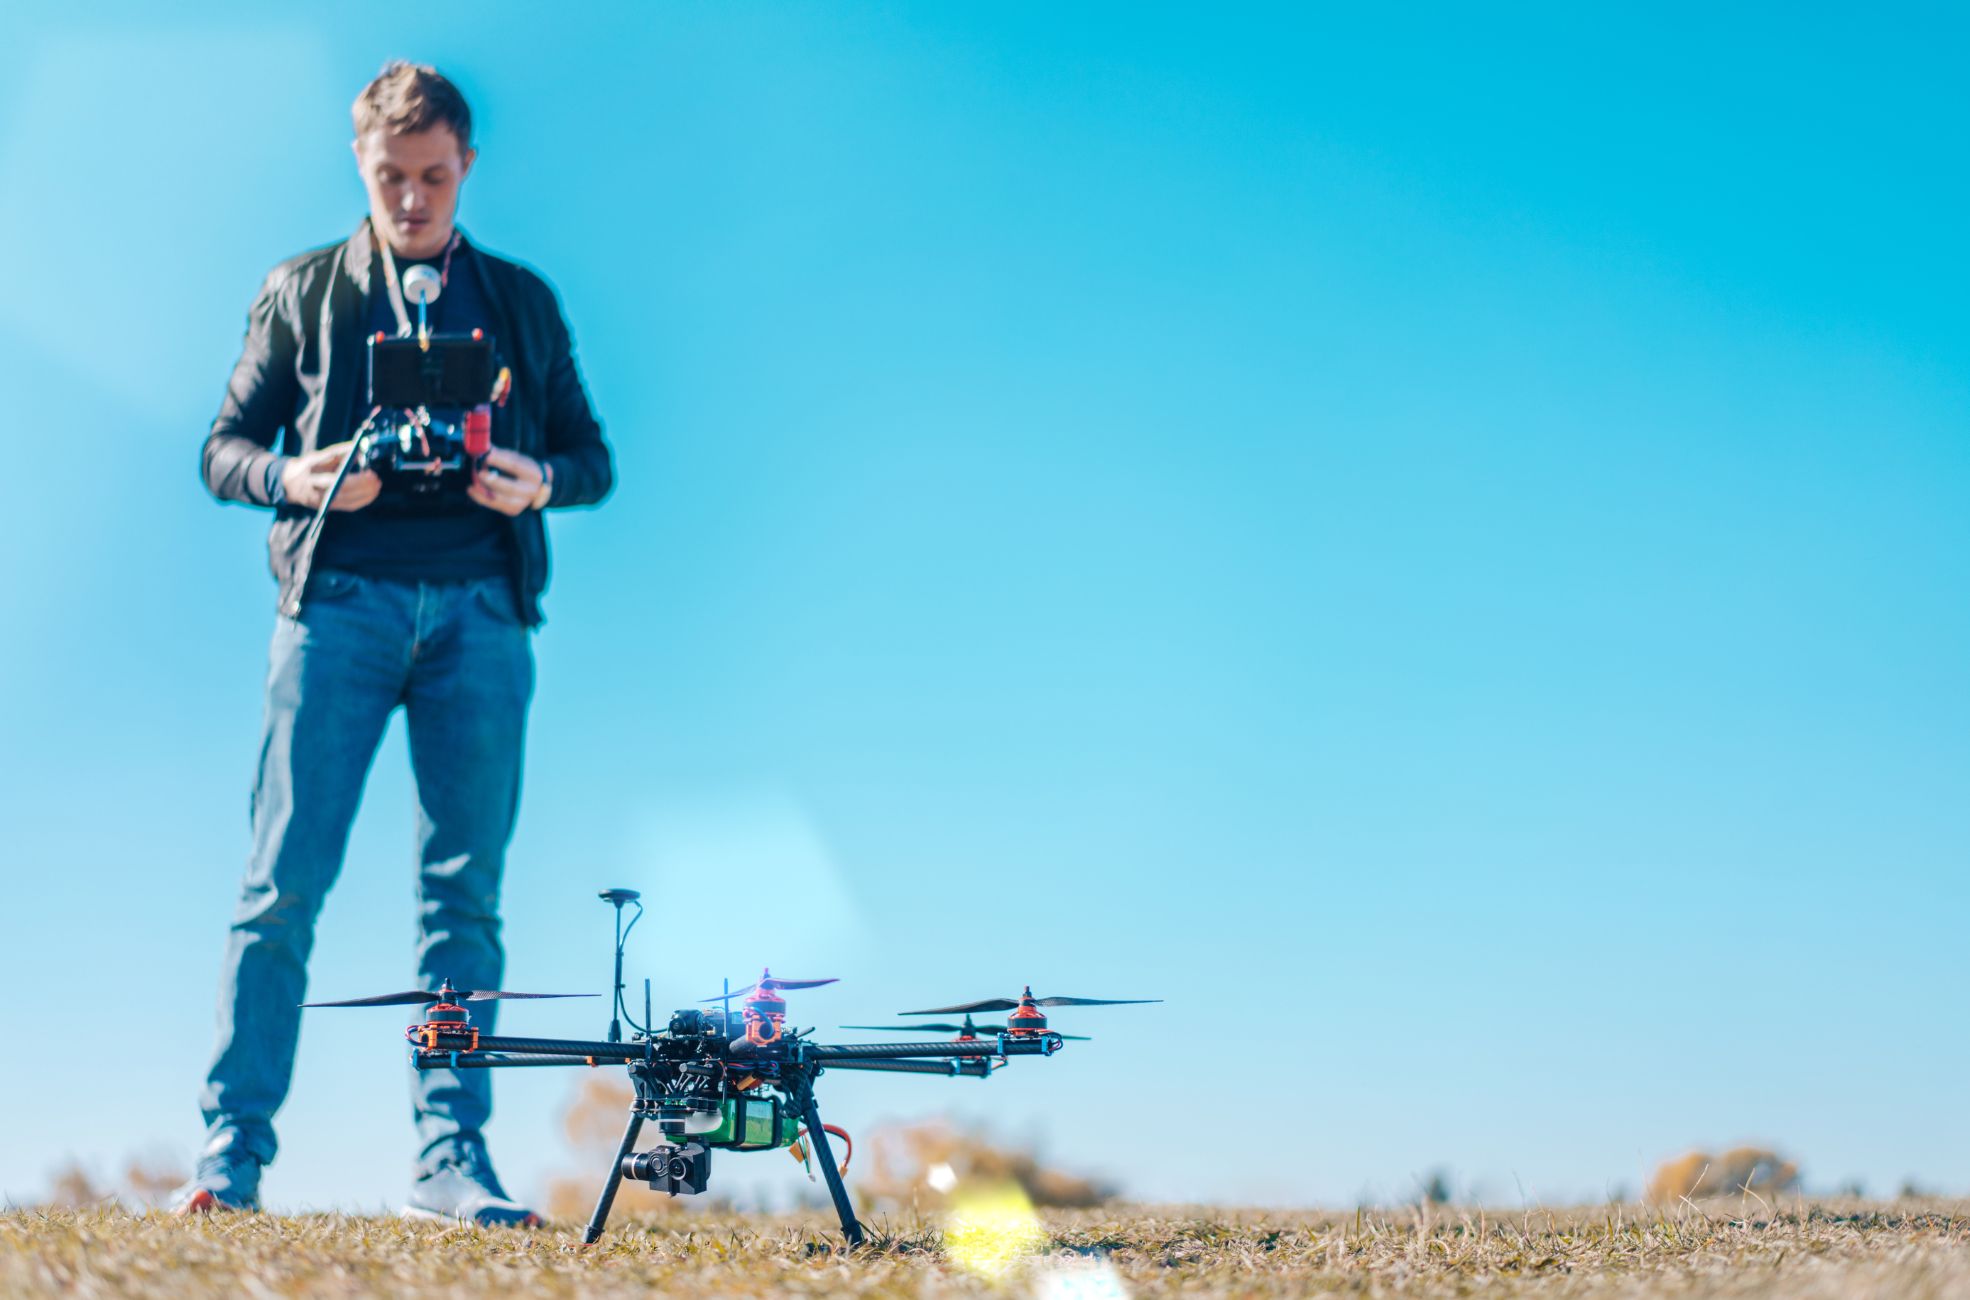 Man Working With Drone For Business